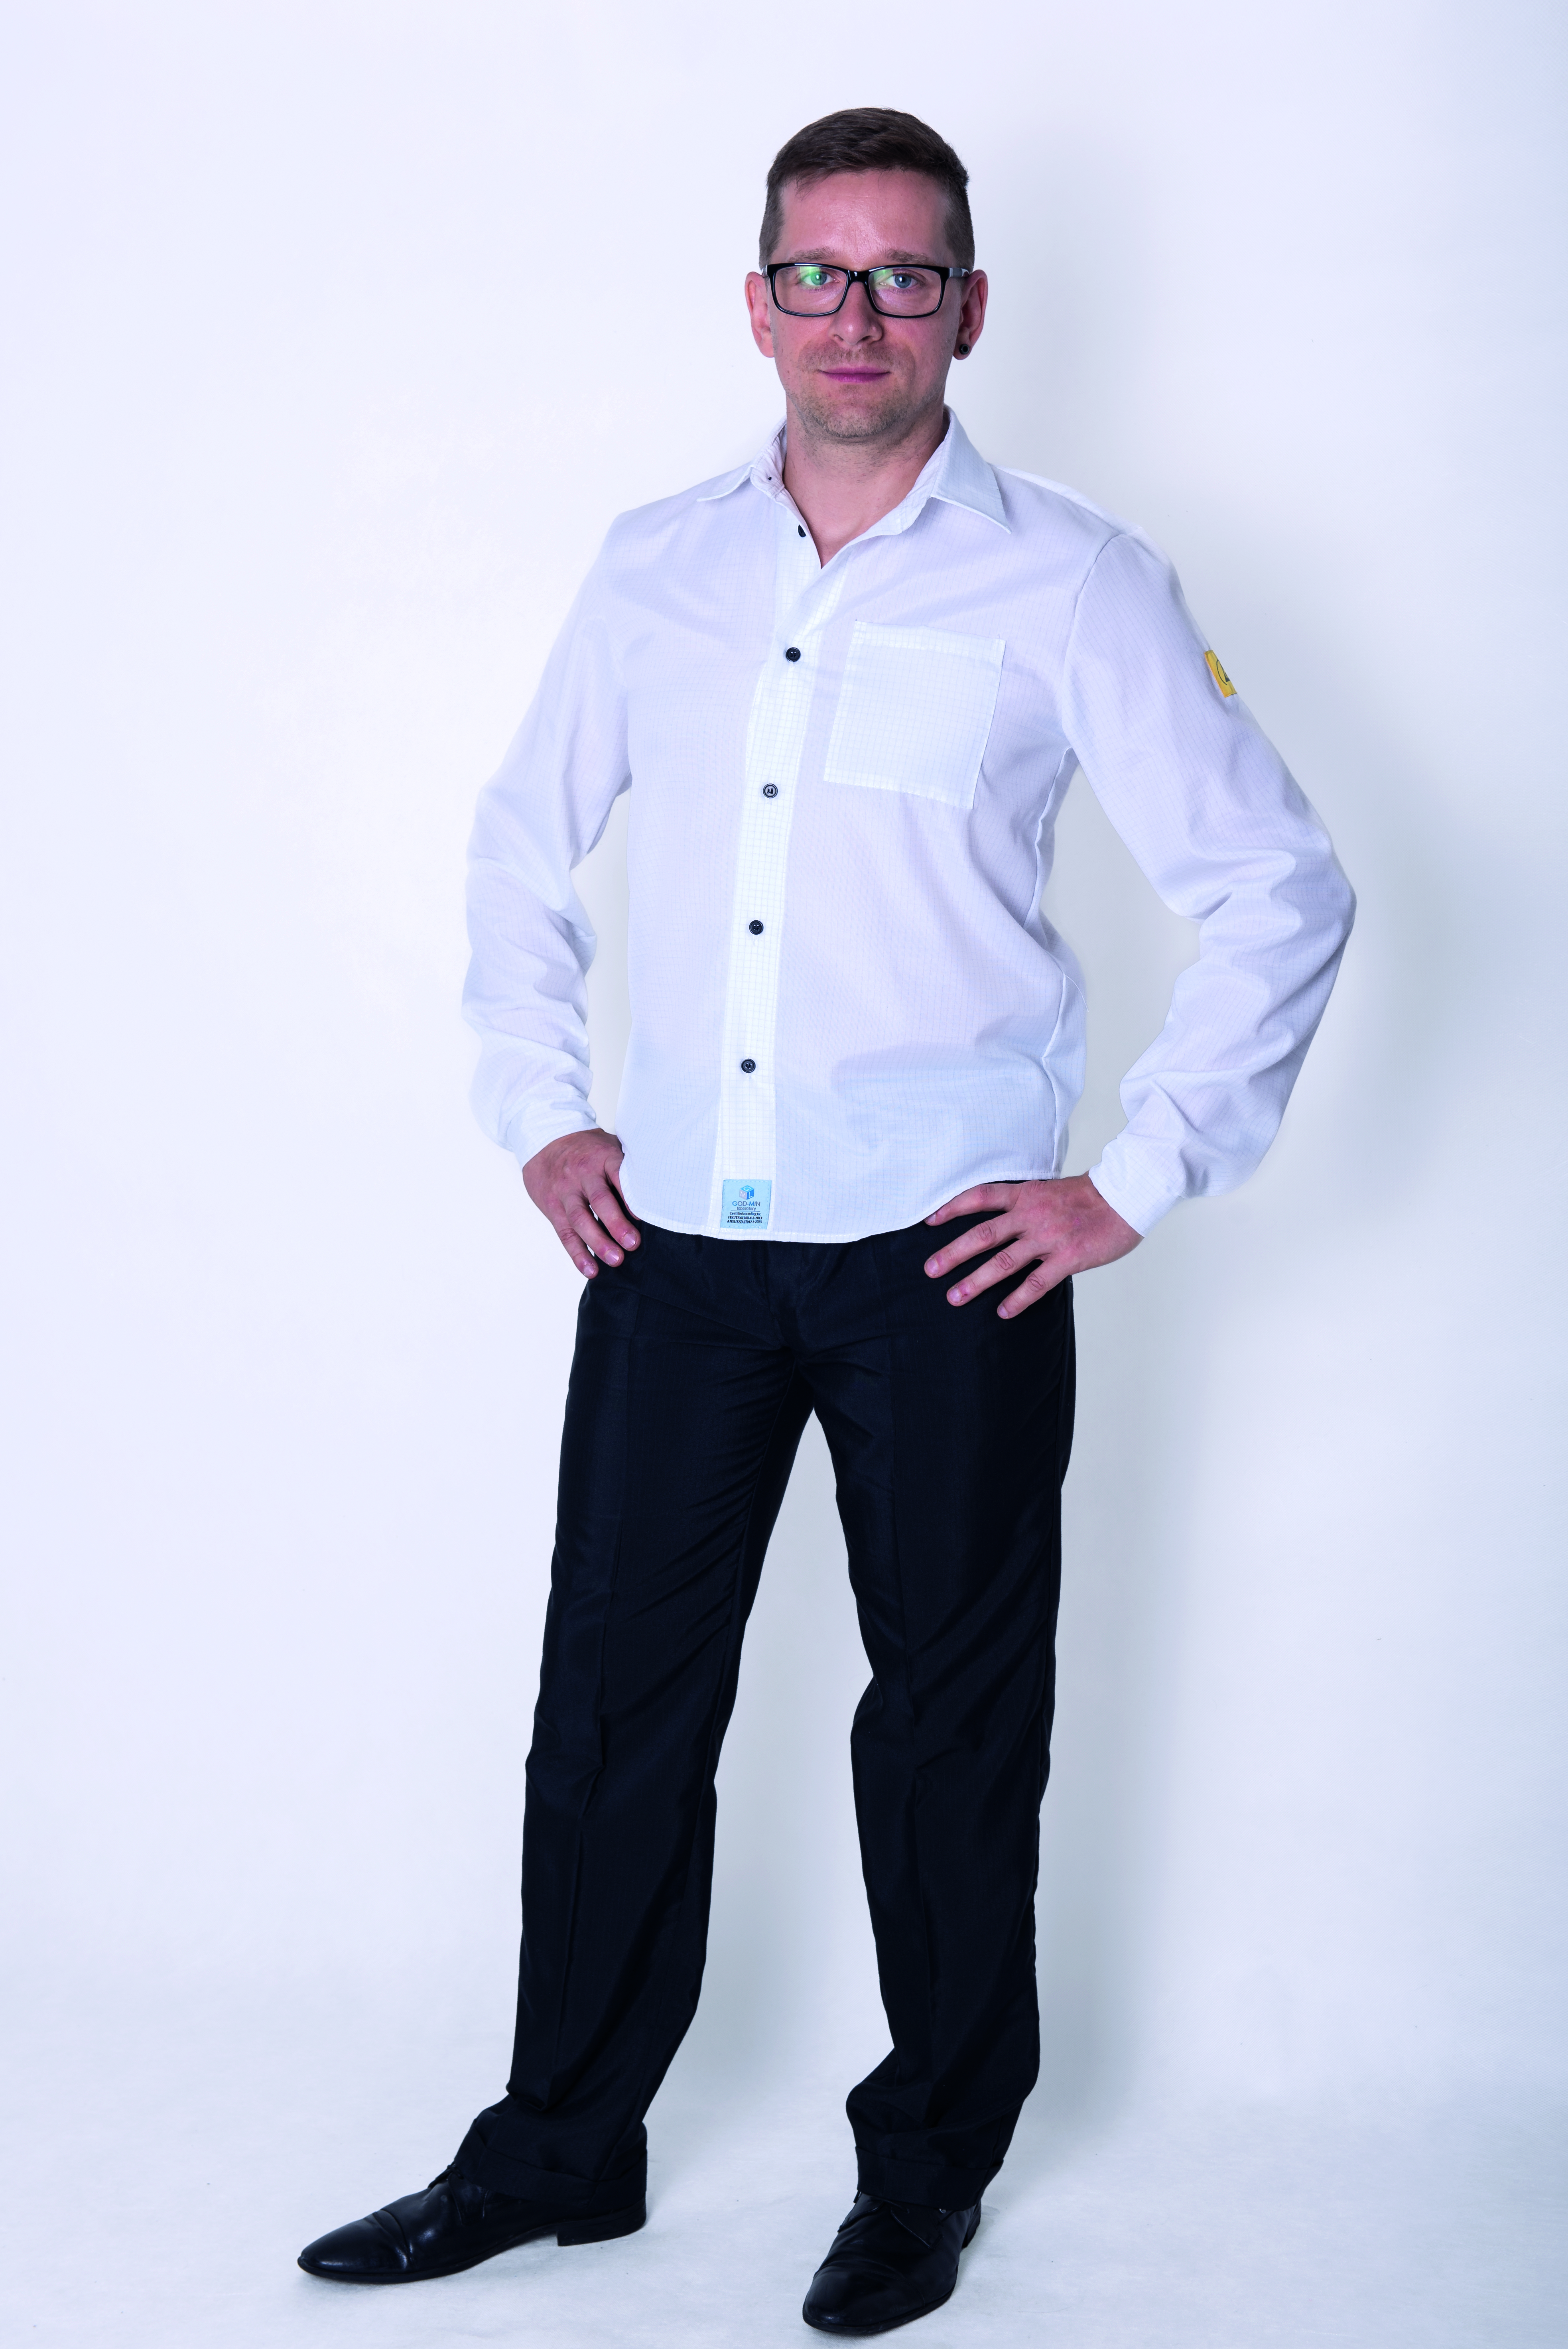 ESD Oxford Shirts Unisex Business ING White Shirts With Long Sleeves & Breast Pocket KK01 Fabric